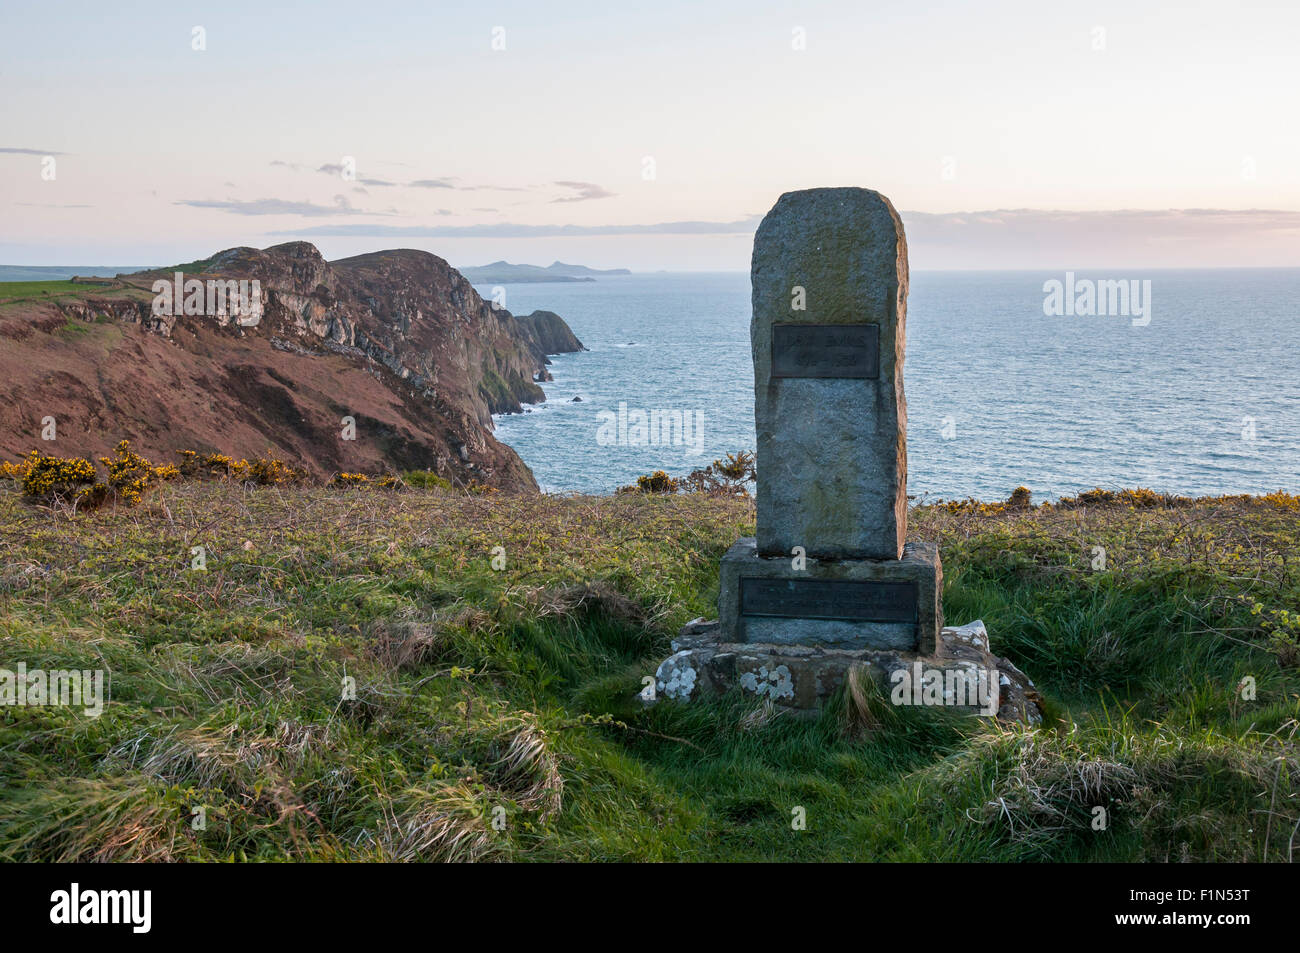 A memorial stone to Dewi Emrys at Pwll Deri on the coast of North Pembrokeshire, Wales. Stock Photo